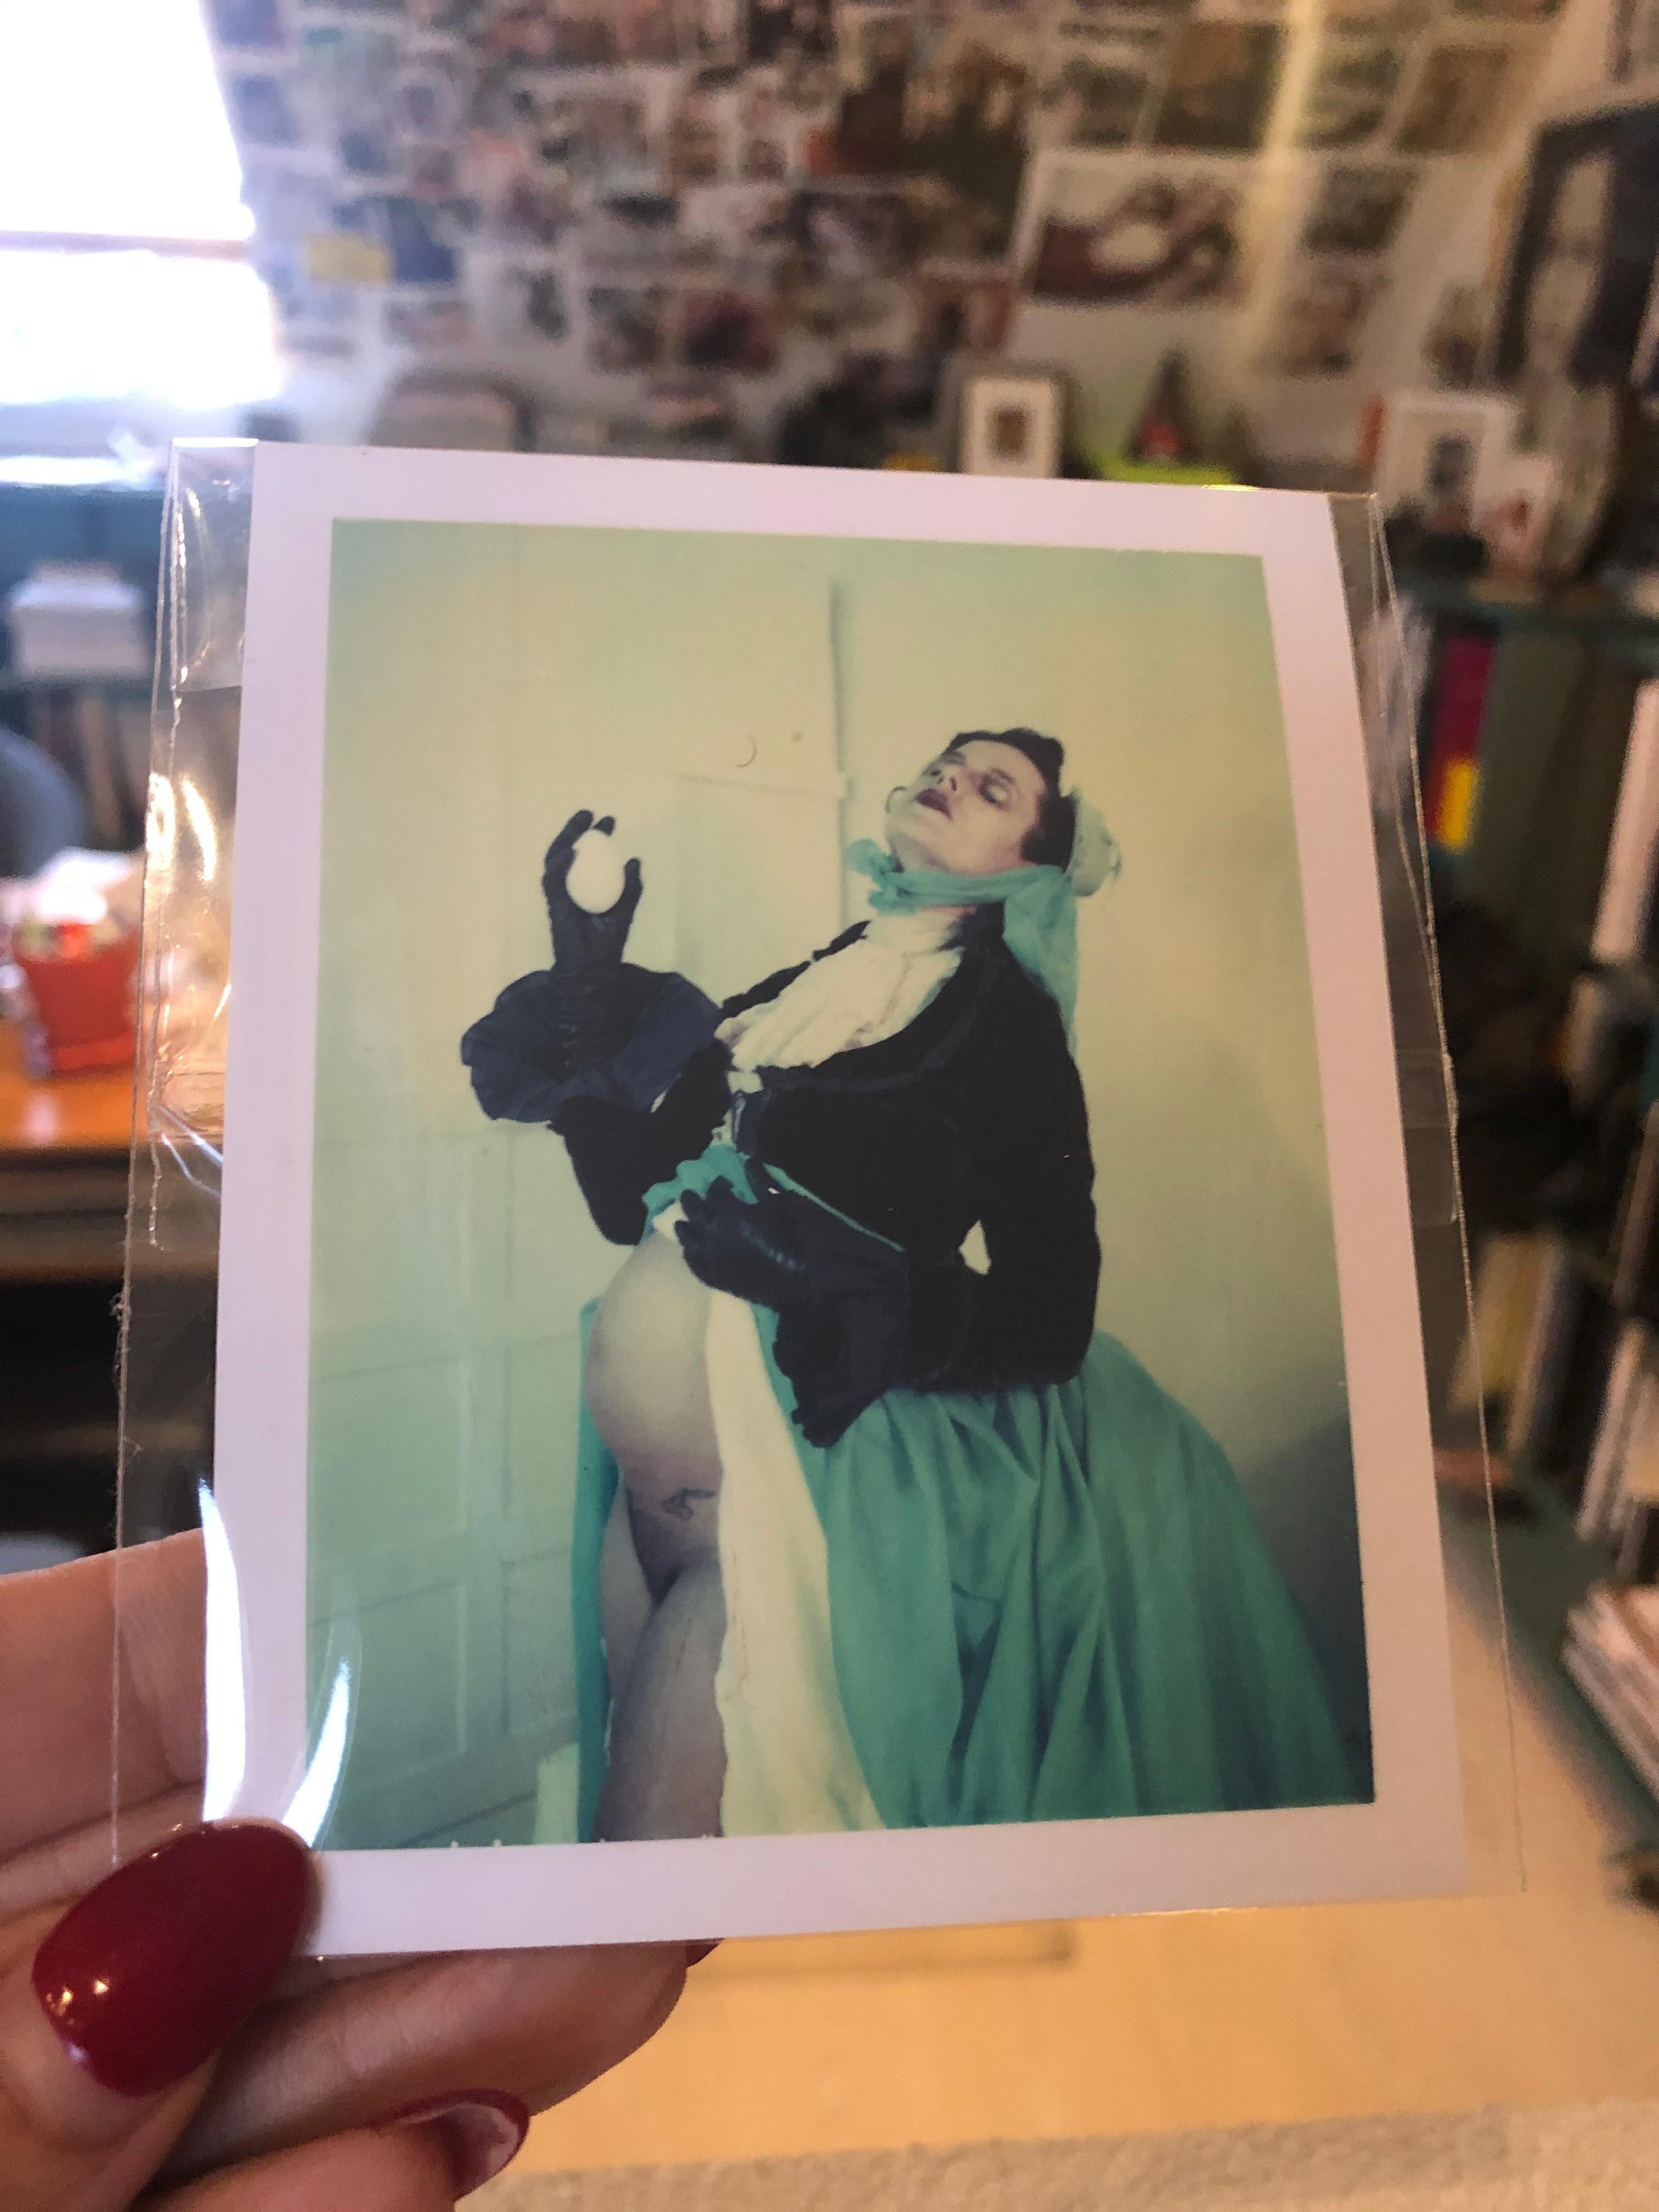 A collection of 3 original Polaroids
Shot on distinct 108 film
From her series [Odd Stories]

Maria Magdalena #HS03 - 2014
The Egg #HS02 - 2012
Allegro Moderato #HS01 - 2014

8,5 x 10,8 (3 ¼ x 4 ¼ in.) each -
Certificate, hand signed & numbered by